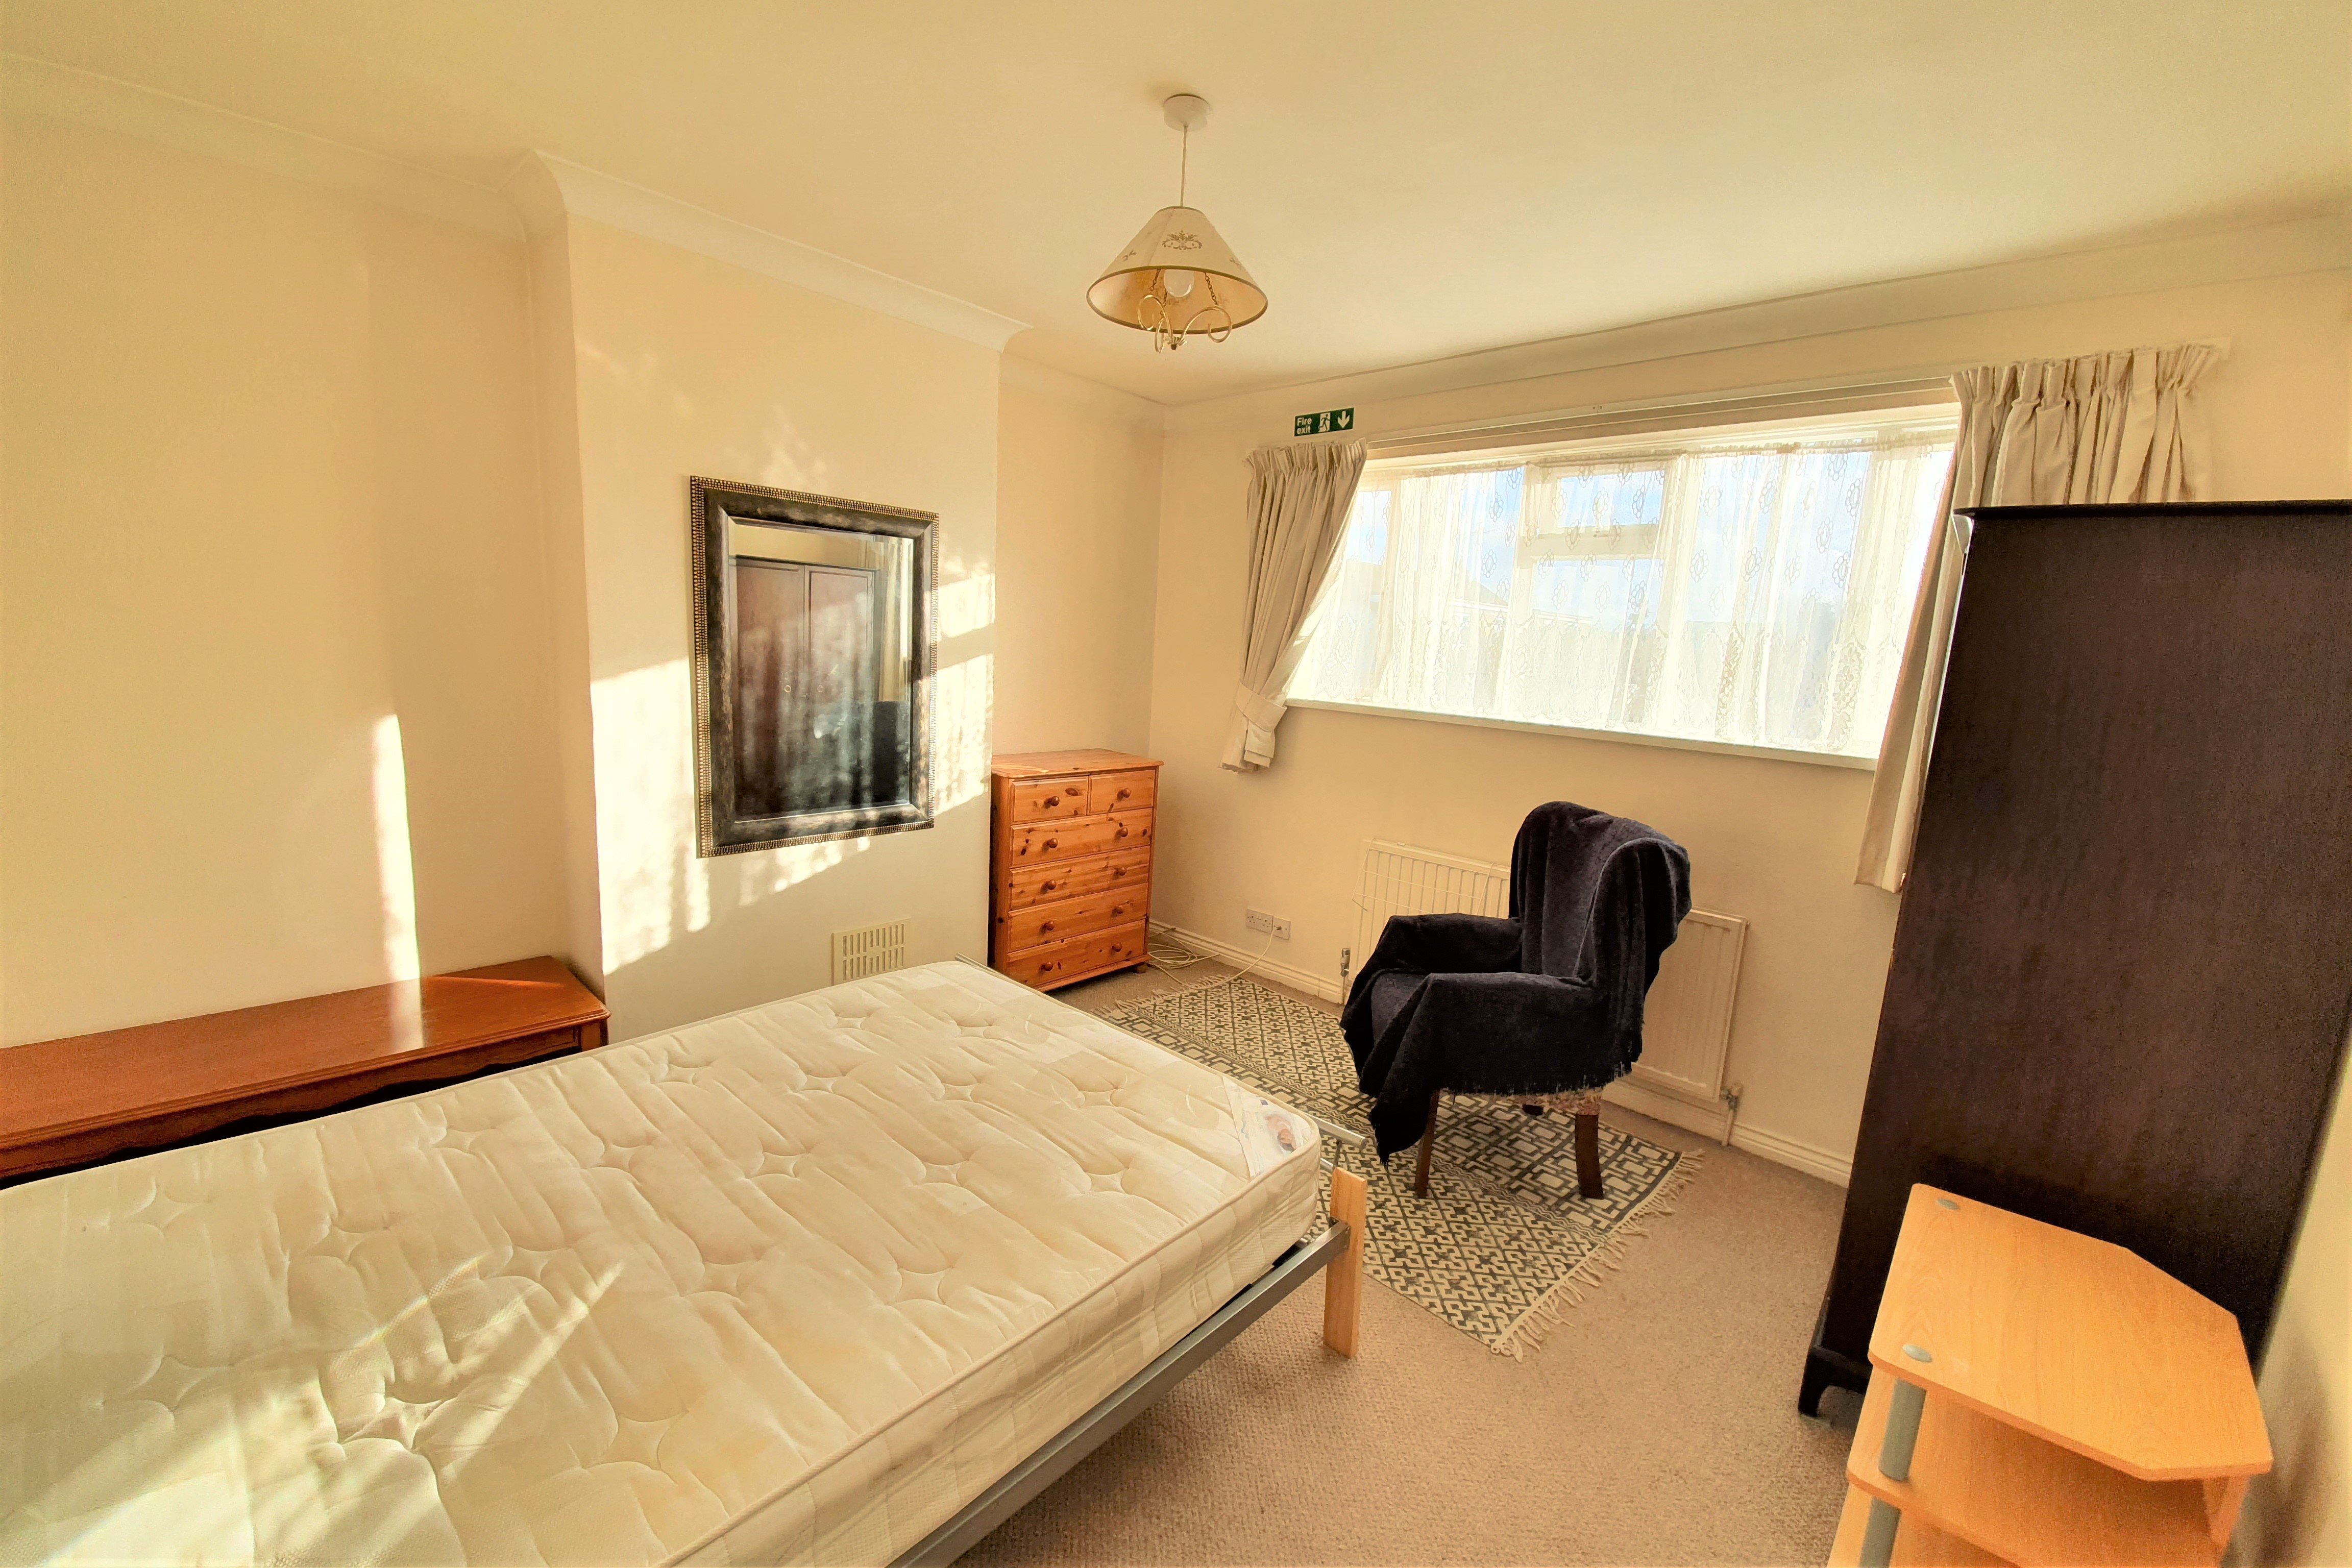 1 bed house / flat share to rent in Church Road (Bedroom 4), Rayleigh 0